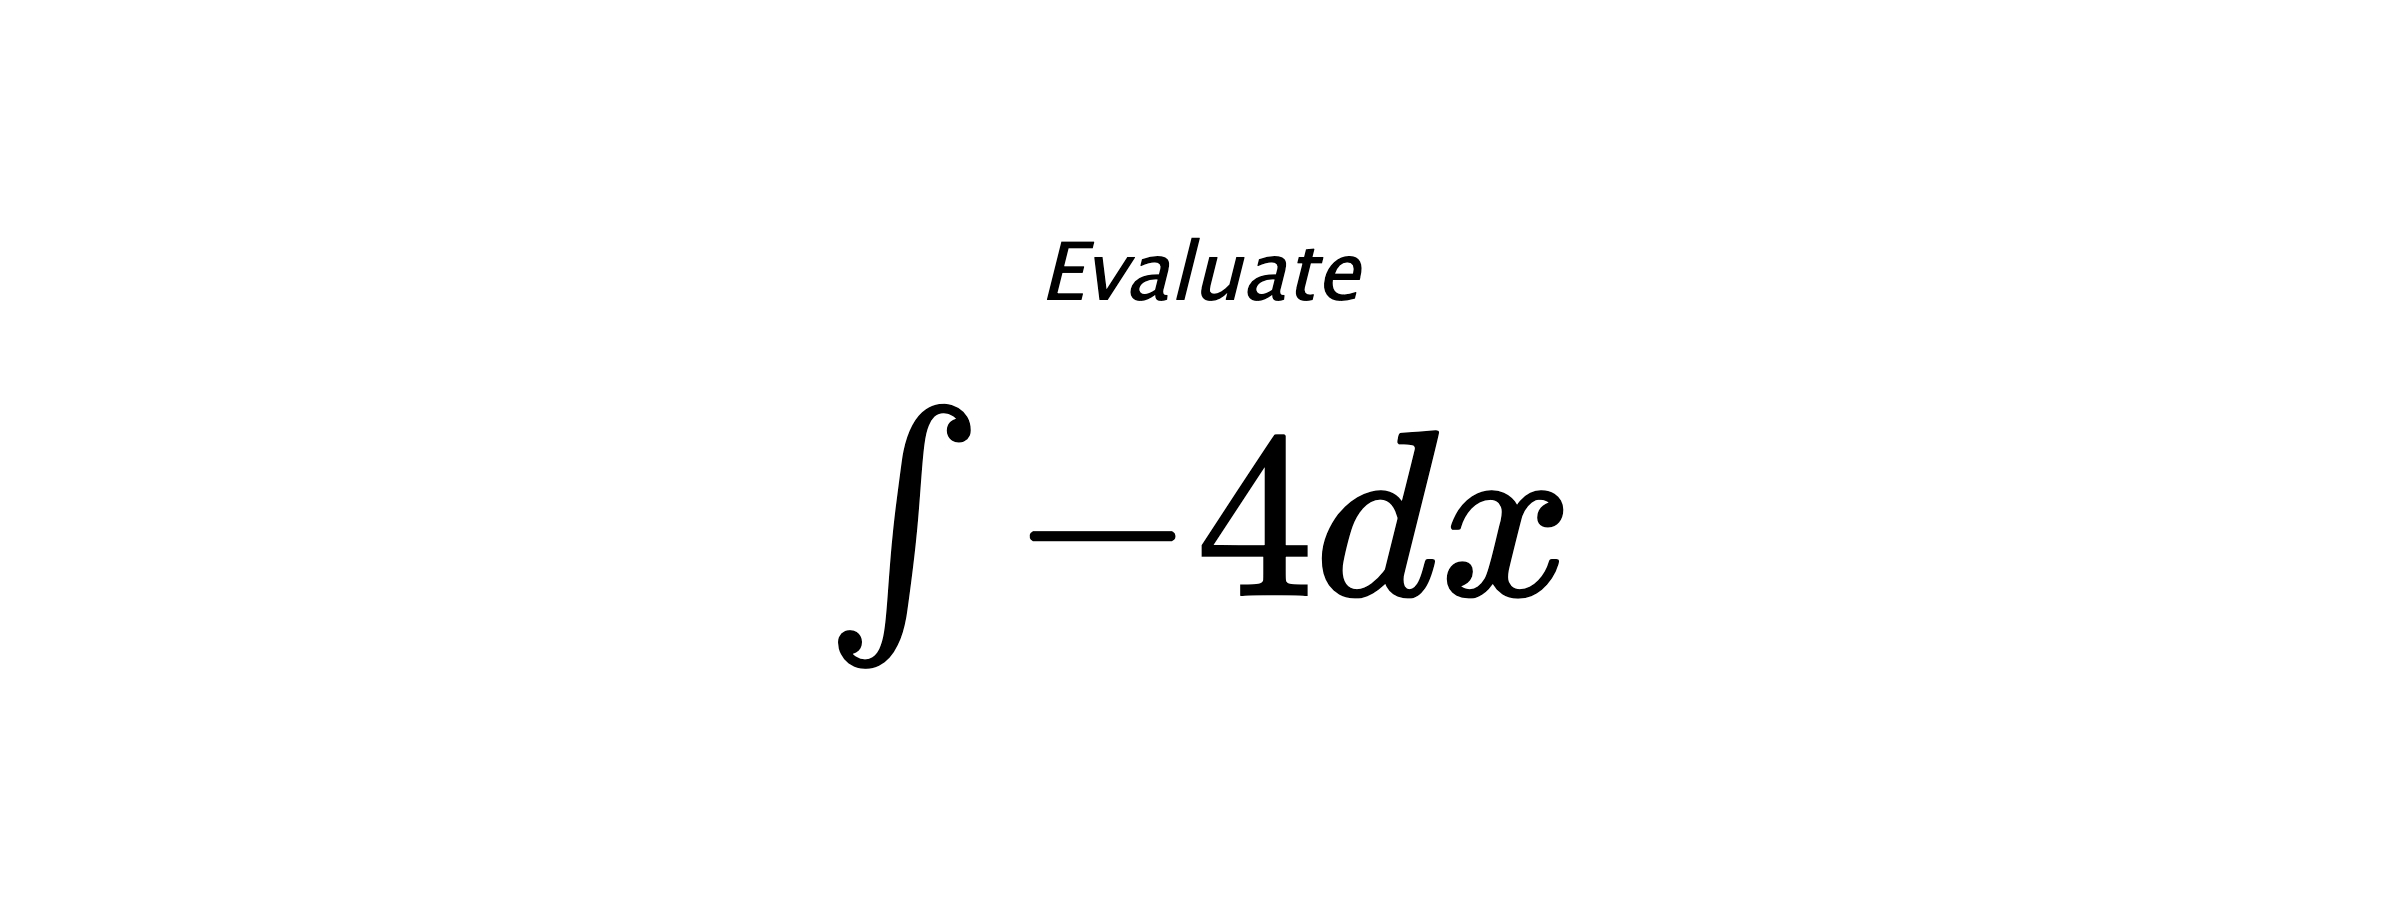 Evaluate $ \int -4 dx $